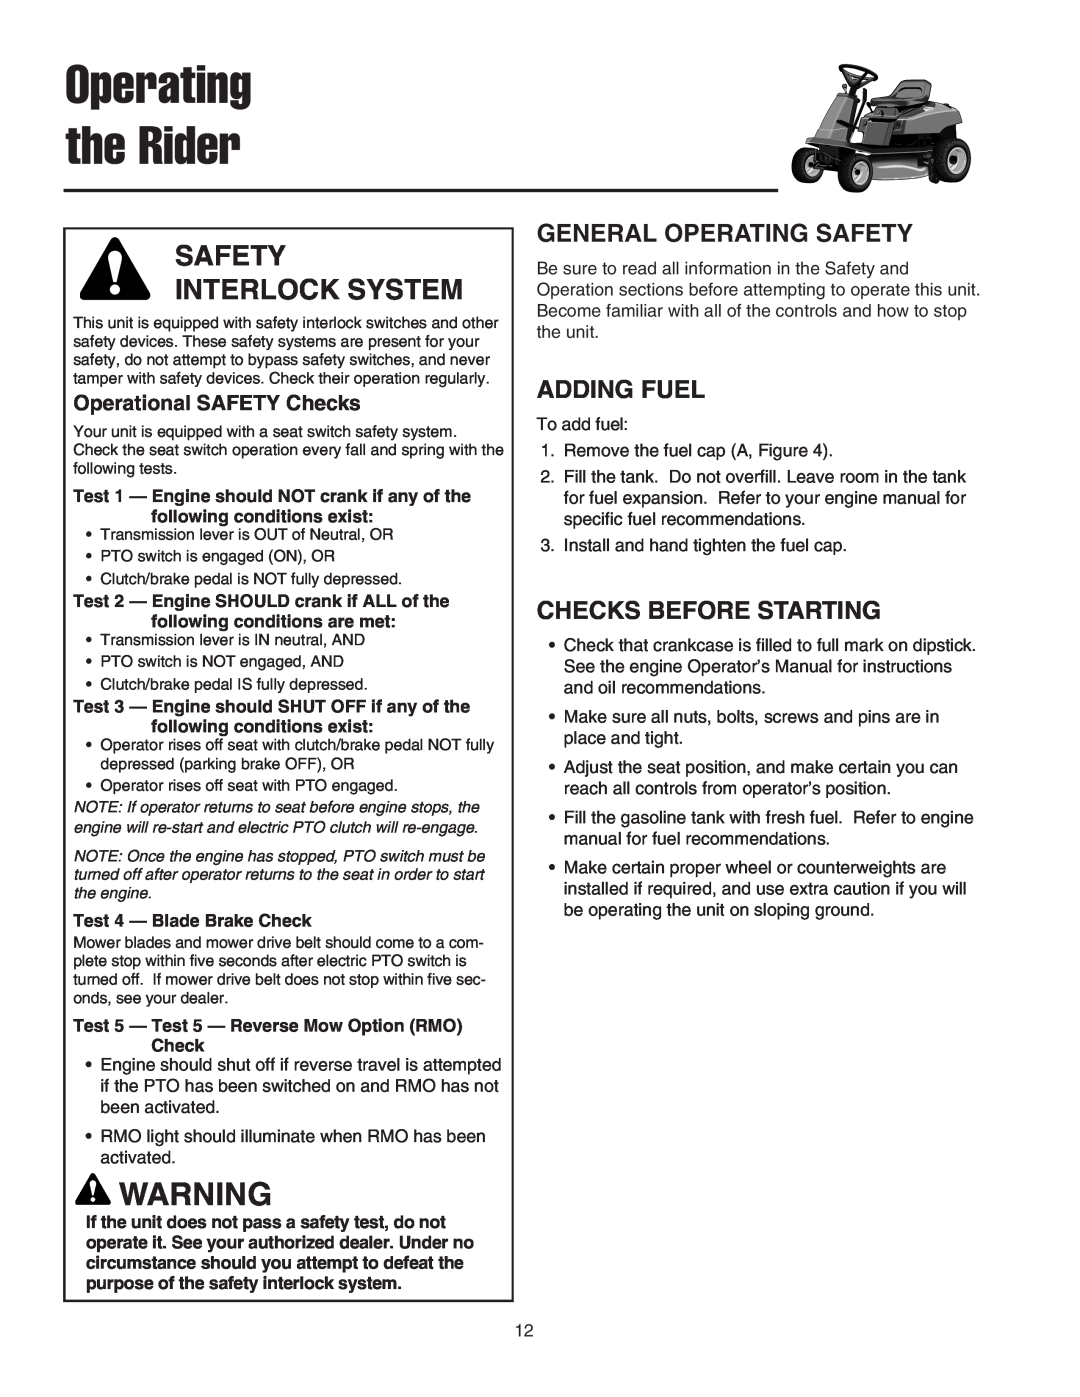 Snapper 400 Series manual General Operating Safety, Adding Fuel, Checks Before Starting, Operating the Rider 